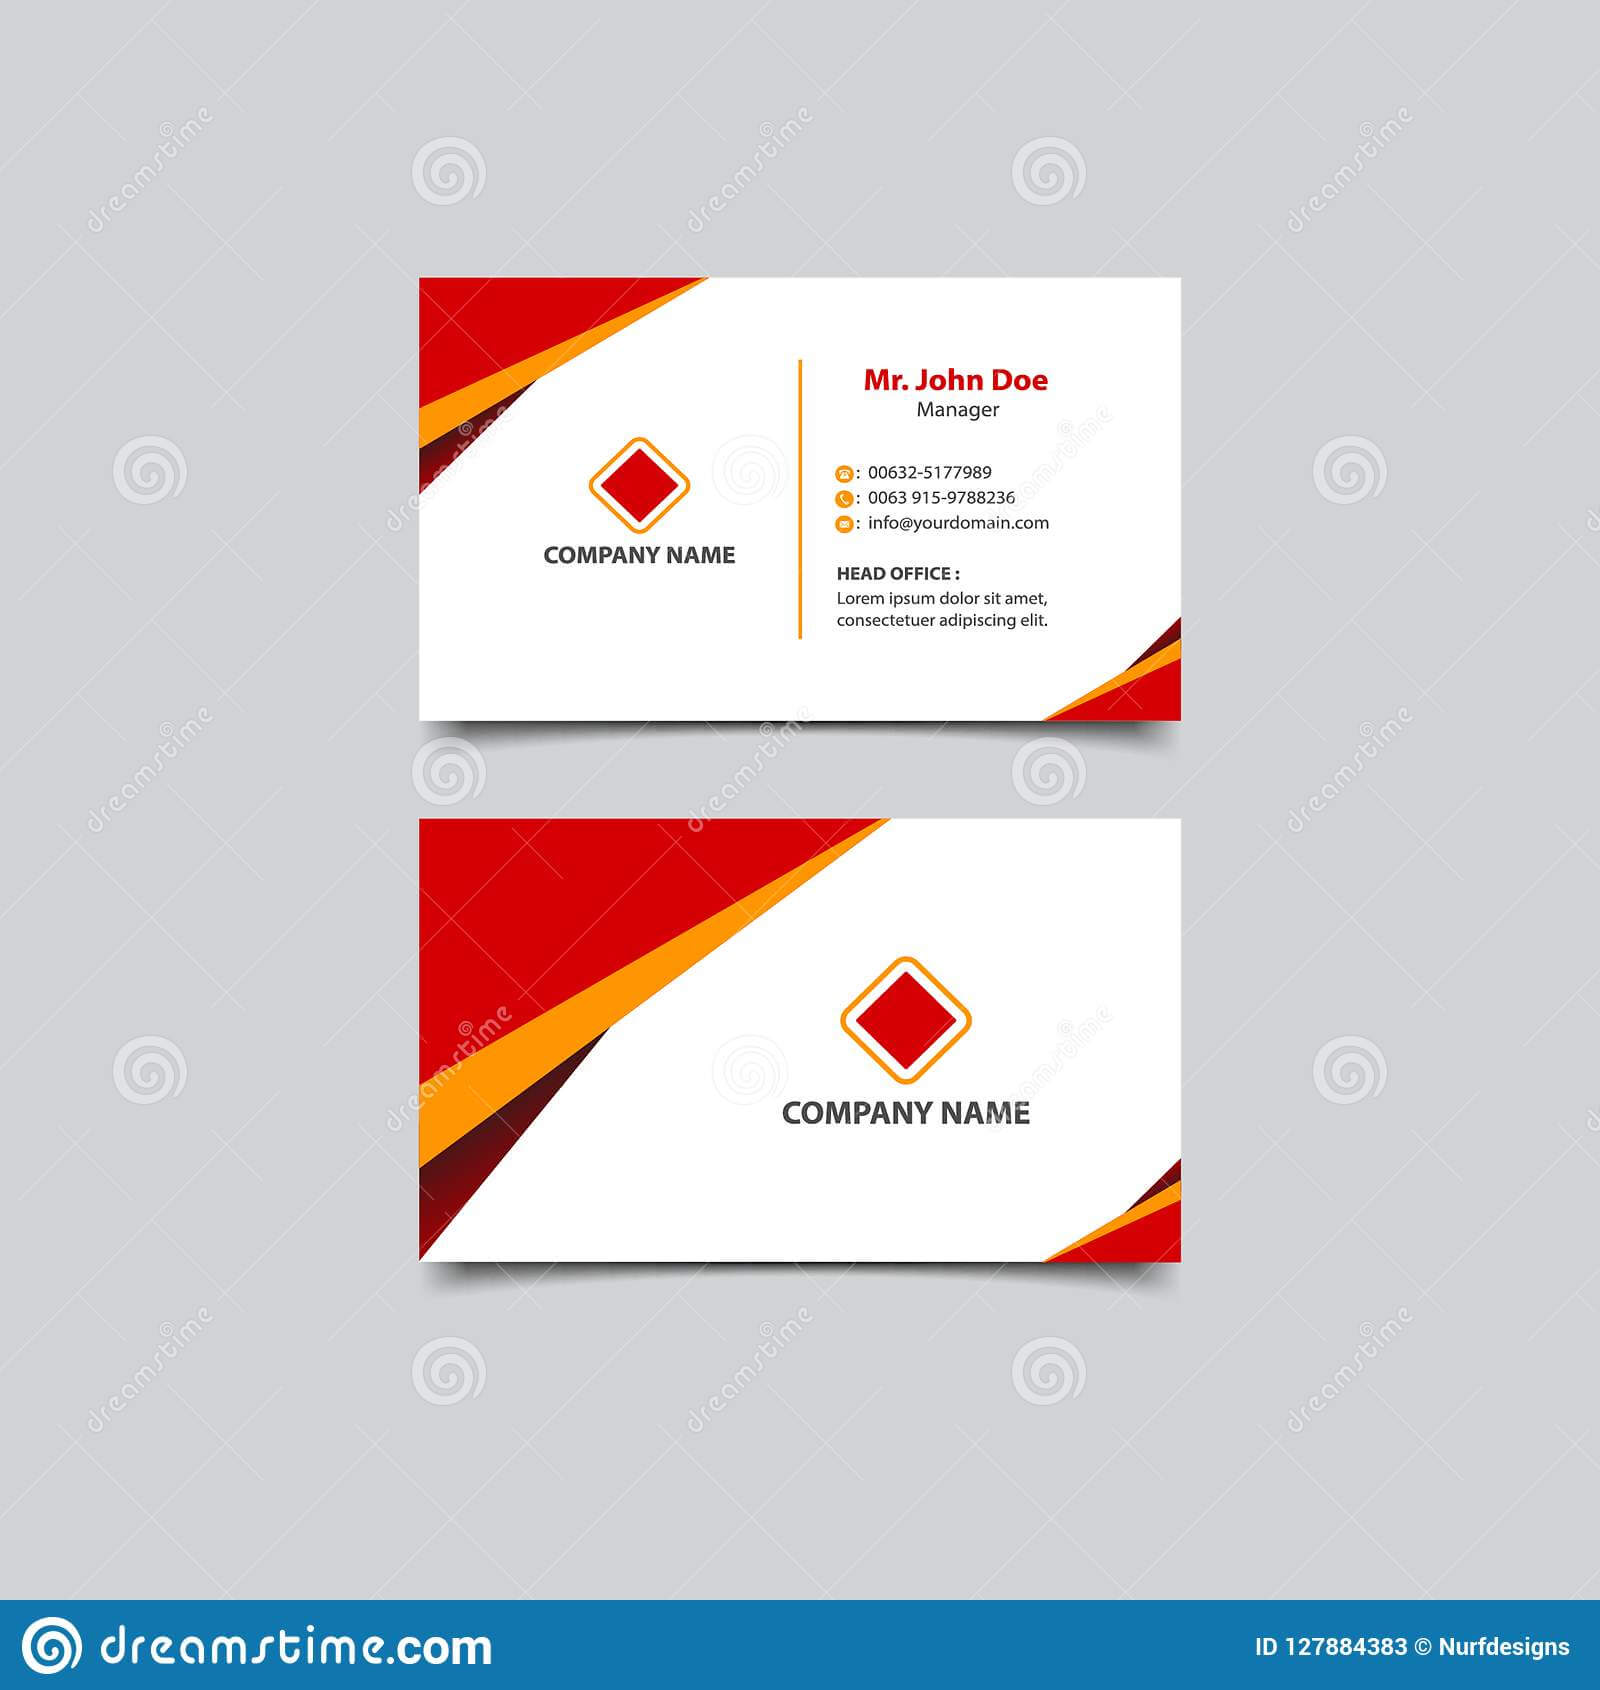 Simple And Modern Business Card Template Design Stock Vector In Modern Business Card Design Templates